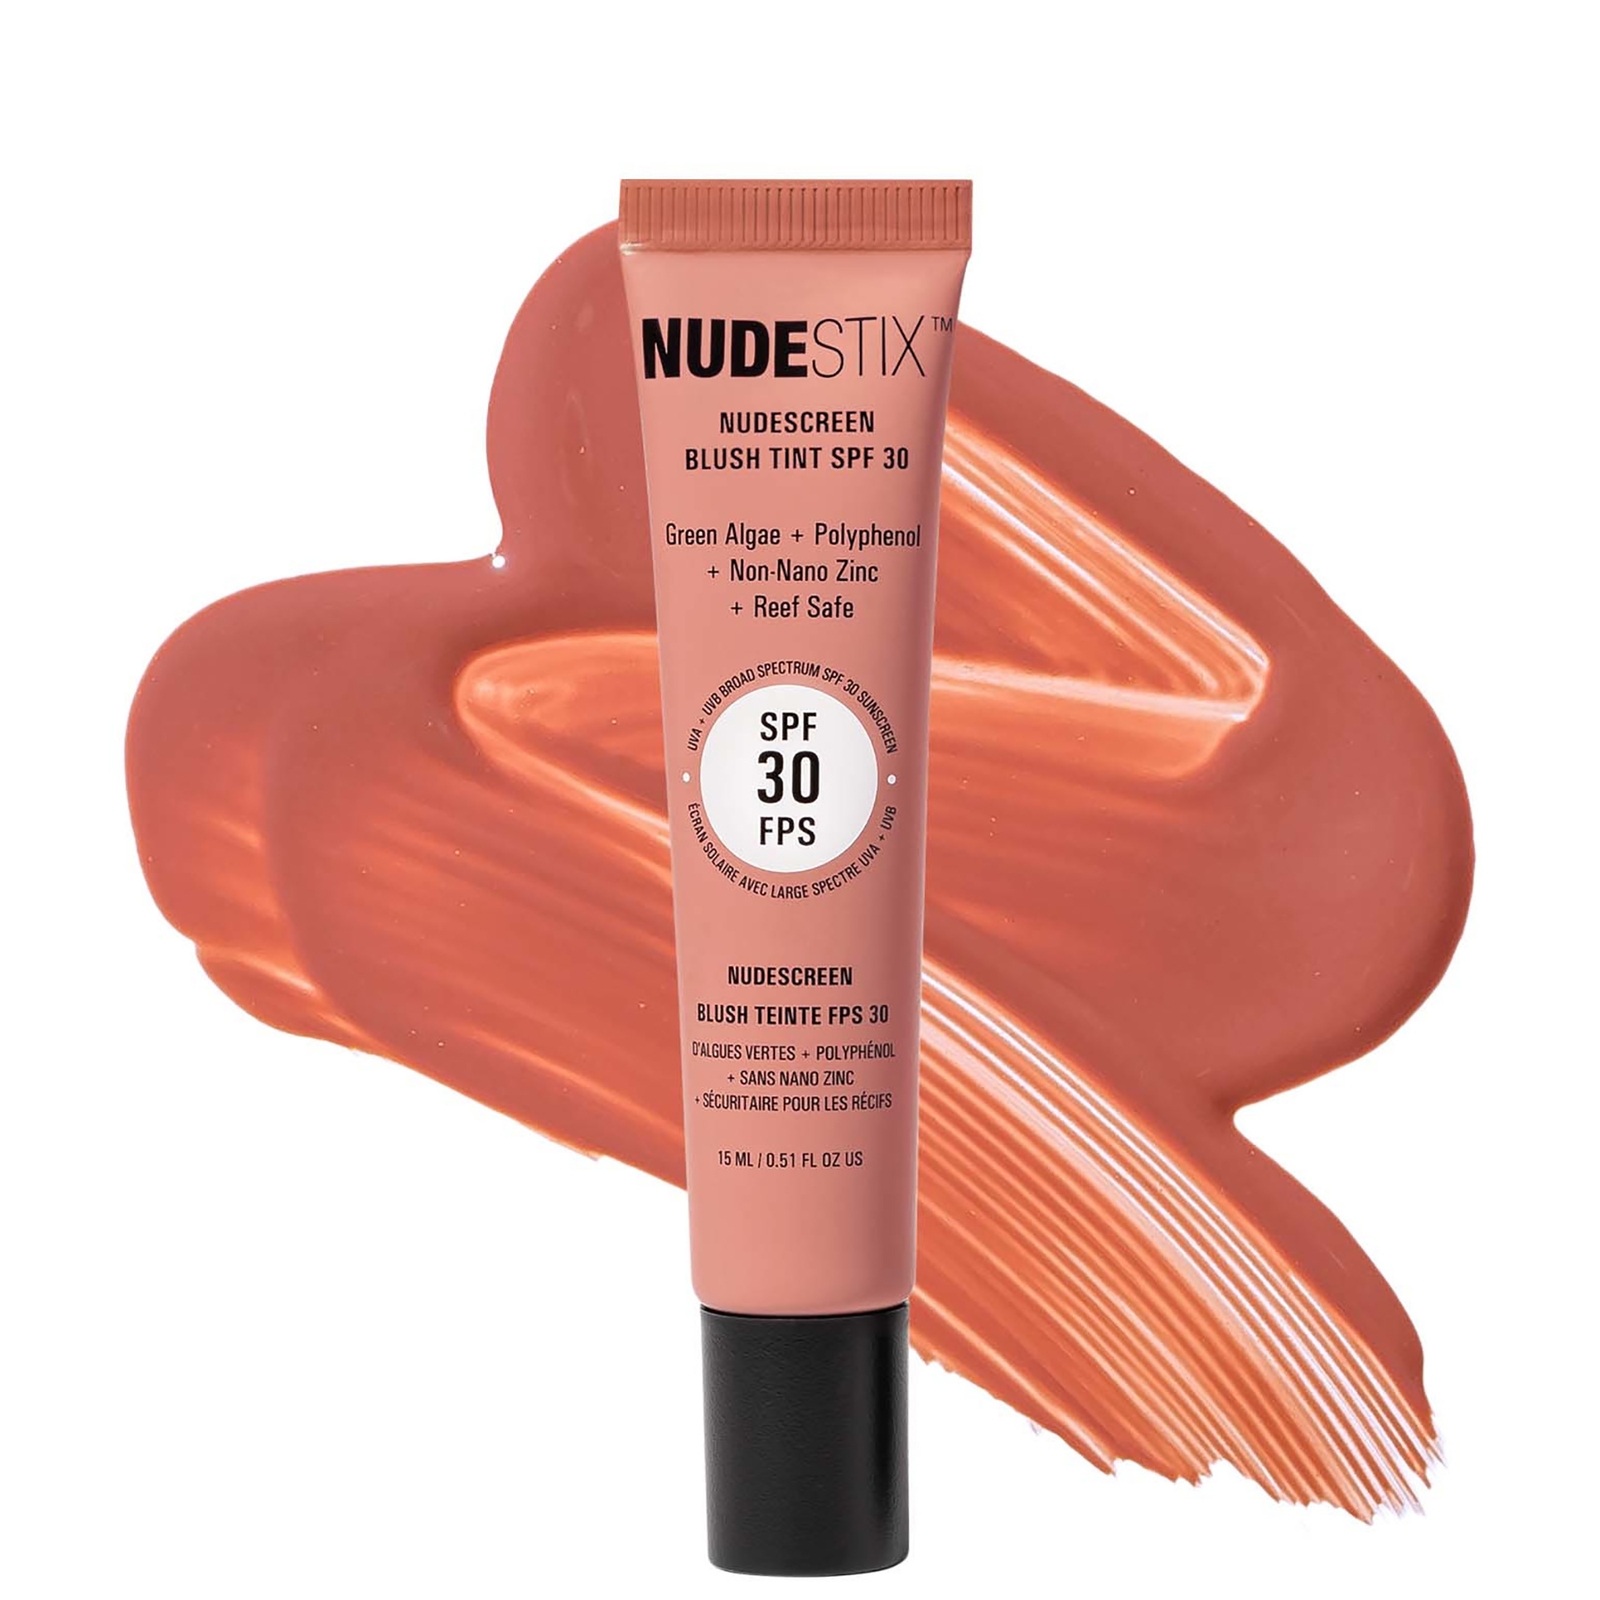 Nudestix Nudescreen Blush Tint Spf 30 15ml (various Shades) - Sunkissed In White